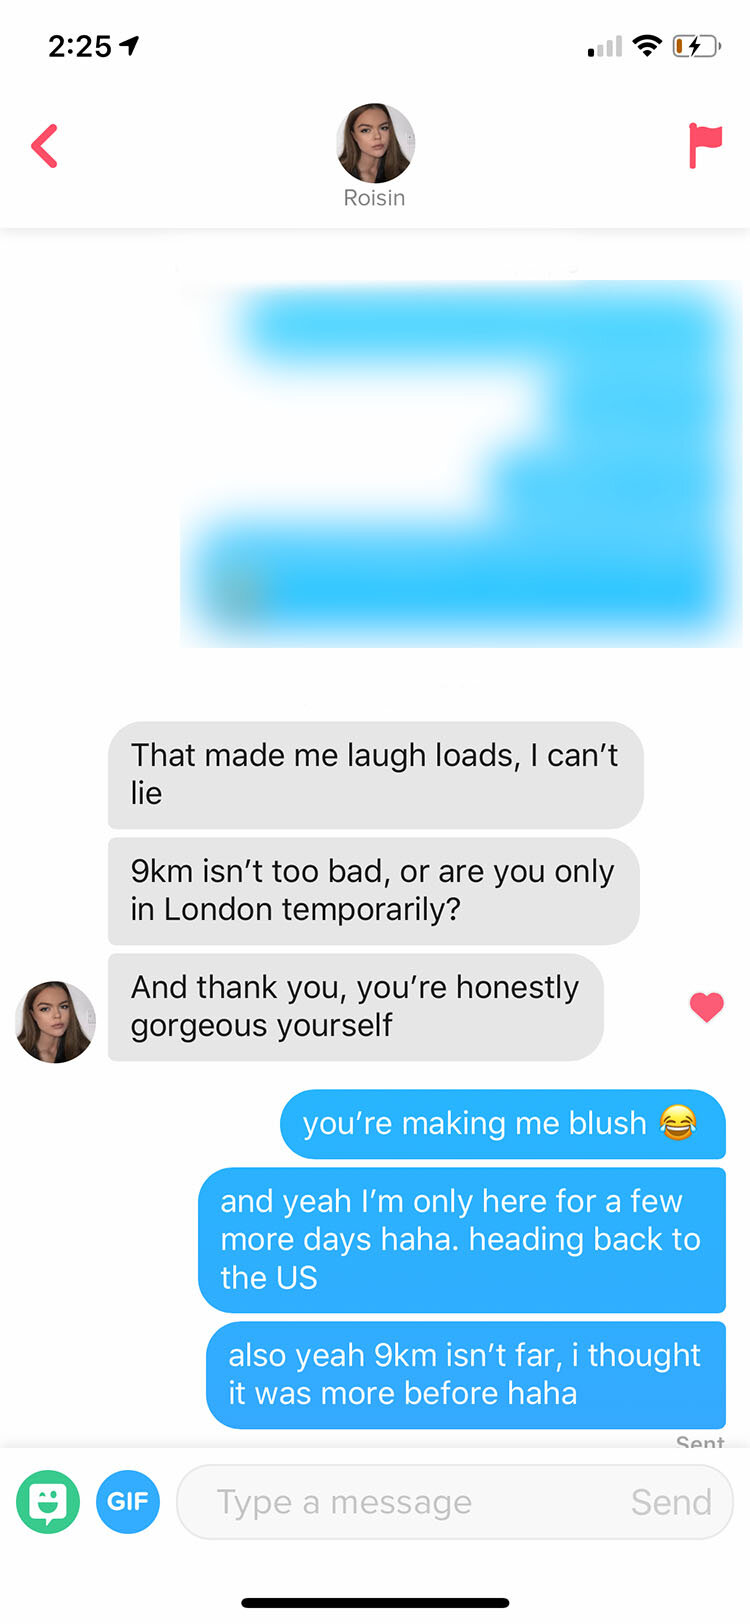 25 Best Tinder Conversation Starters That Won't Make You Feel Completely Awkward